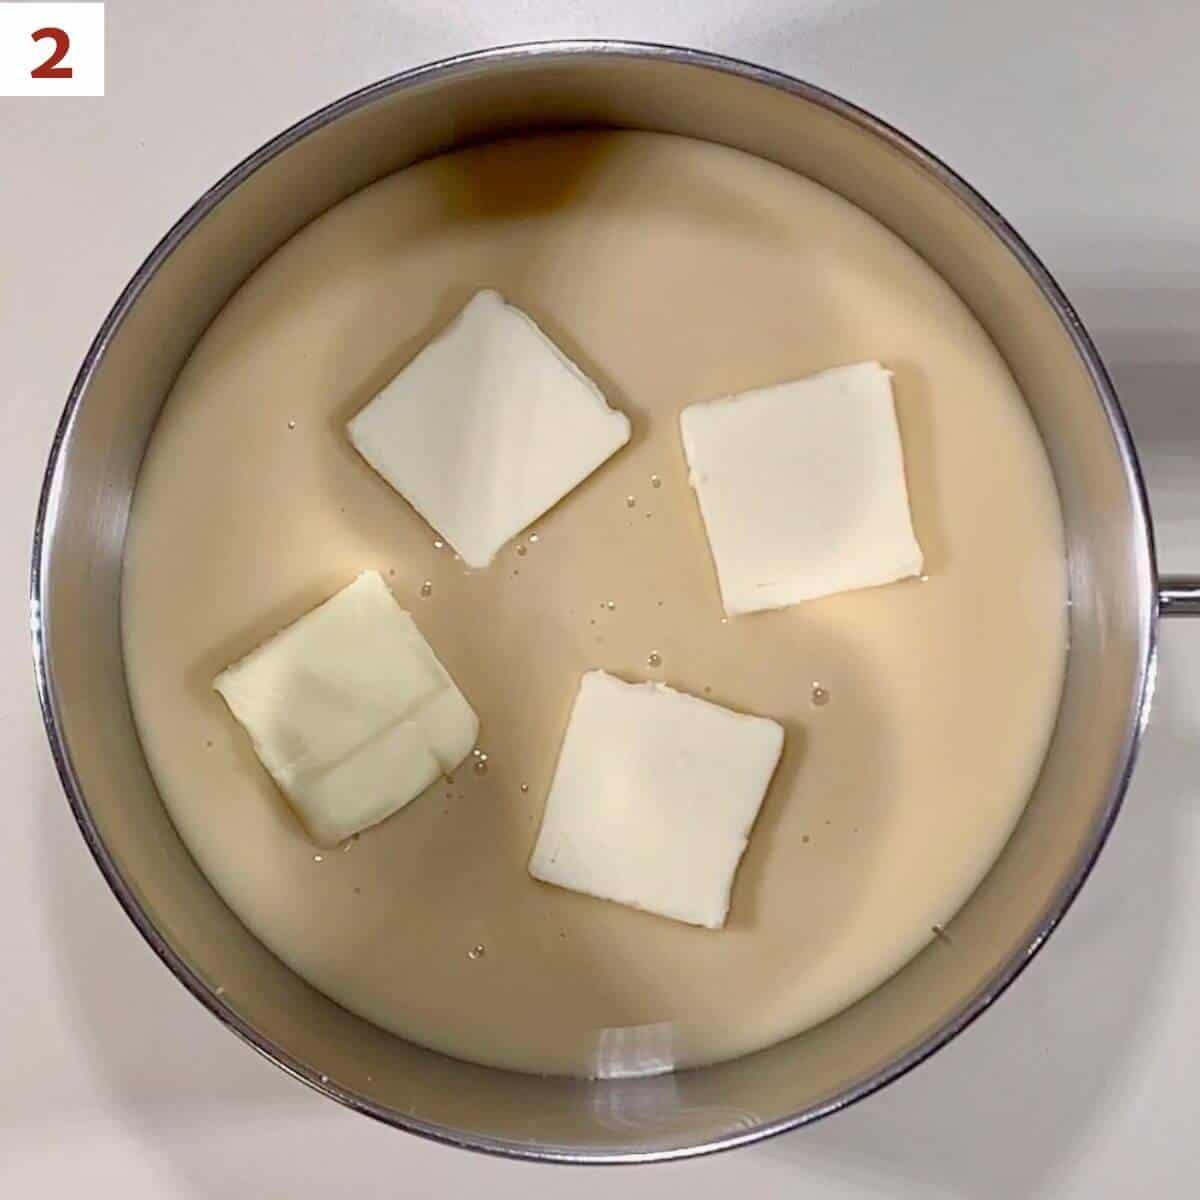 Heating sweetened condensed milk and butter.